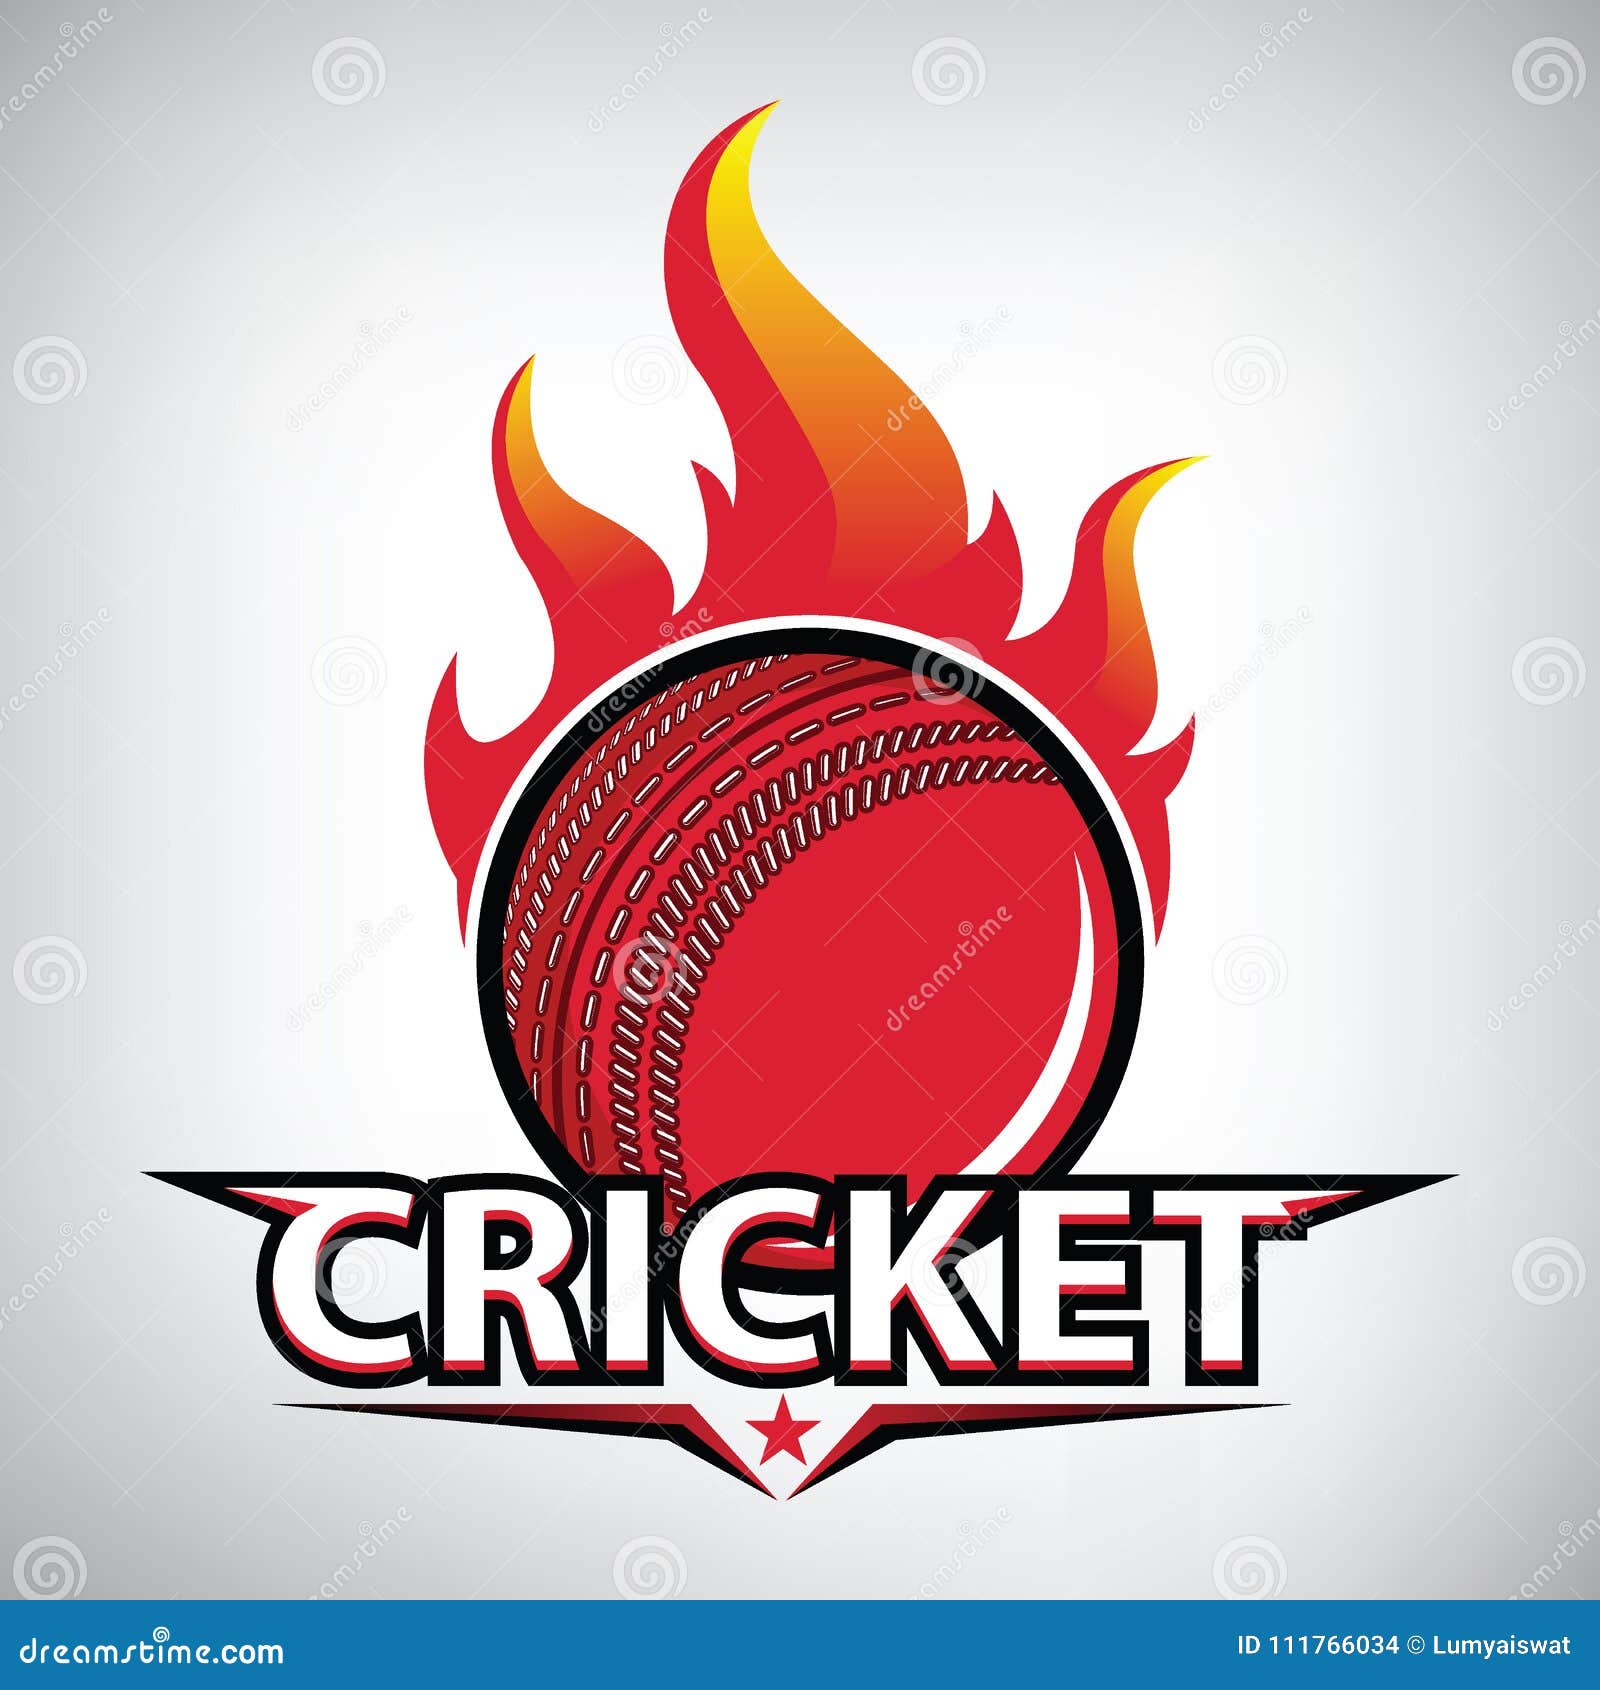 Cricket Jersey Projects | Photos, videos, logos, illustrations and branding  on Behance